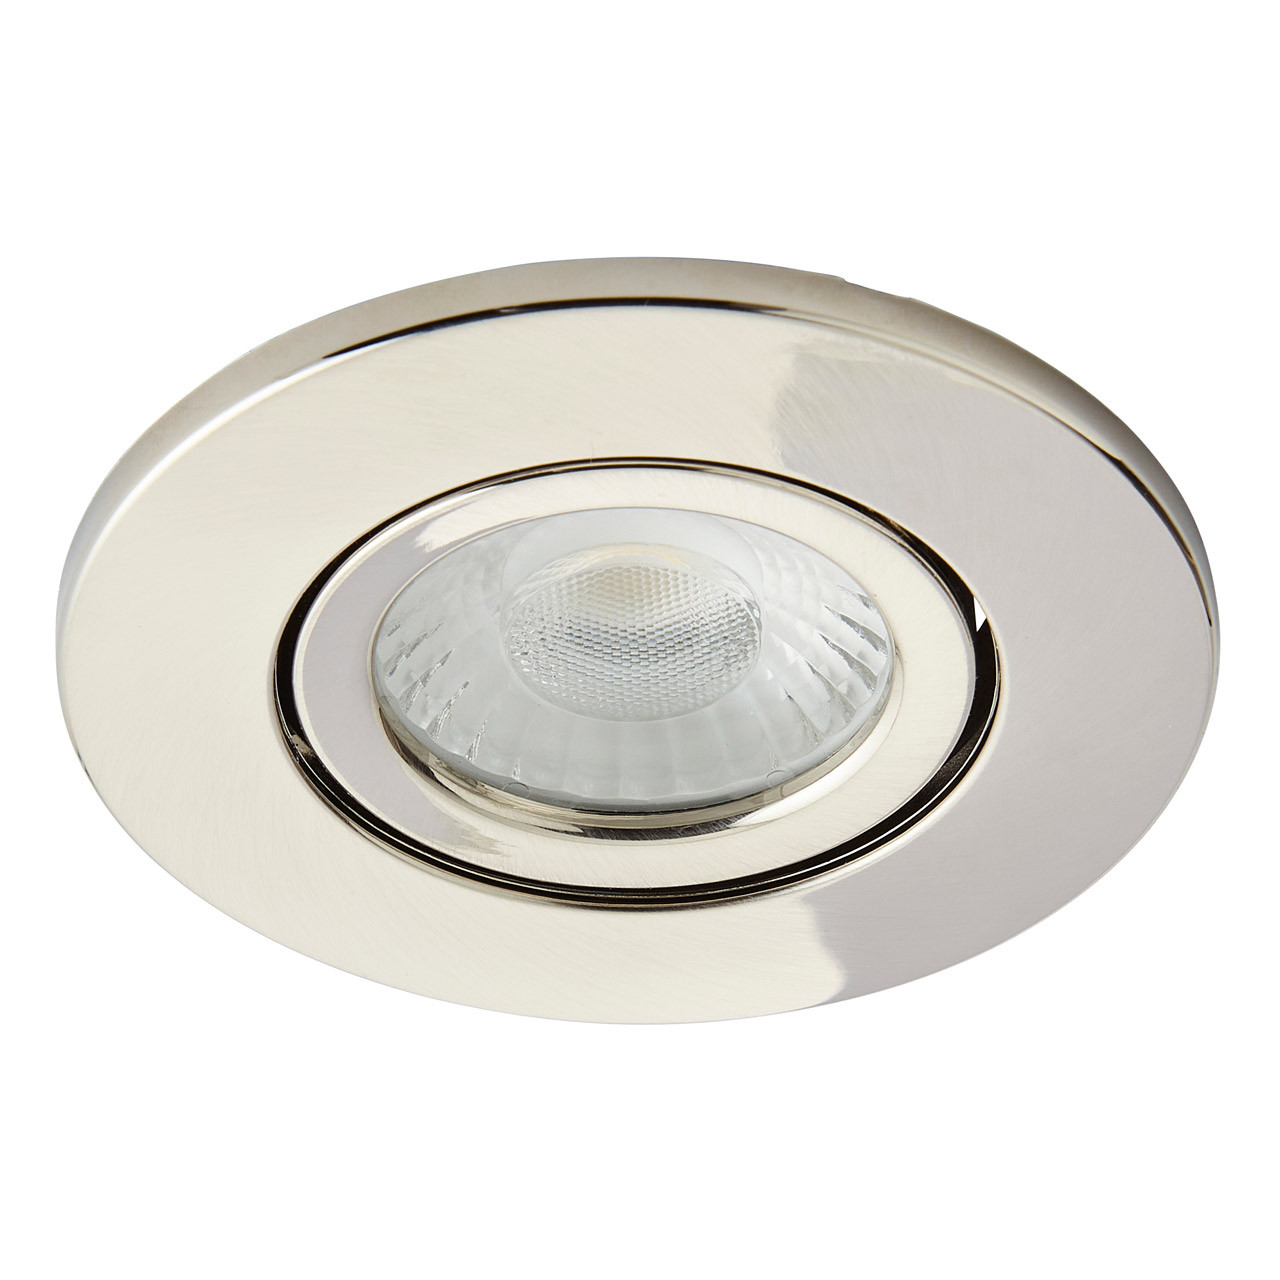 Photos - Chandelier / Lamp SPA Como LED Tiltable Fire Rated Downlight 5W Dimmable Cool White Satin Ni 